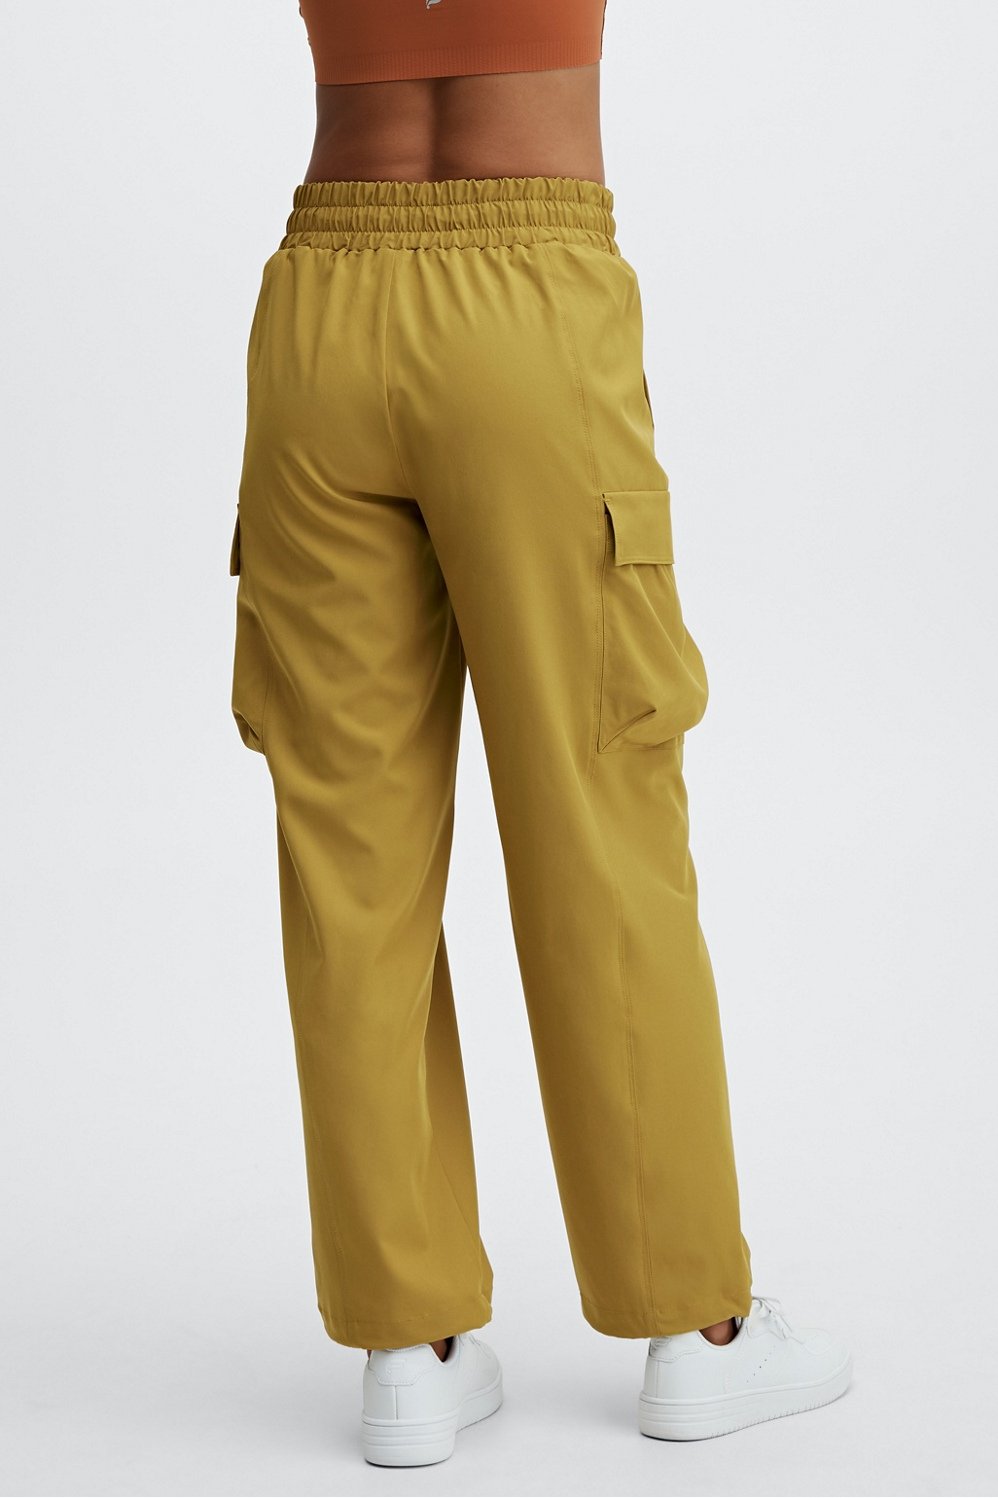 Wild Fable Women's Pants On Sale Up To 90% Off Retail